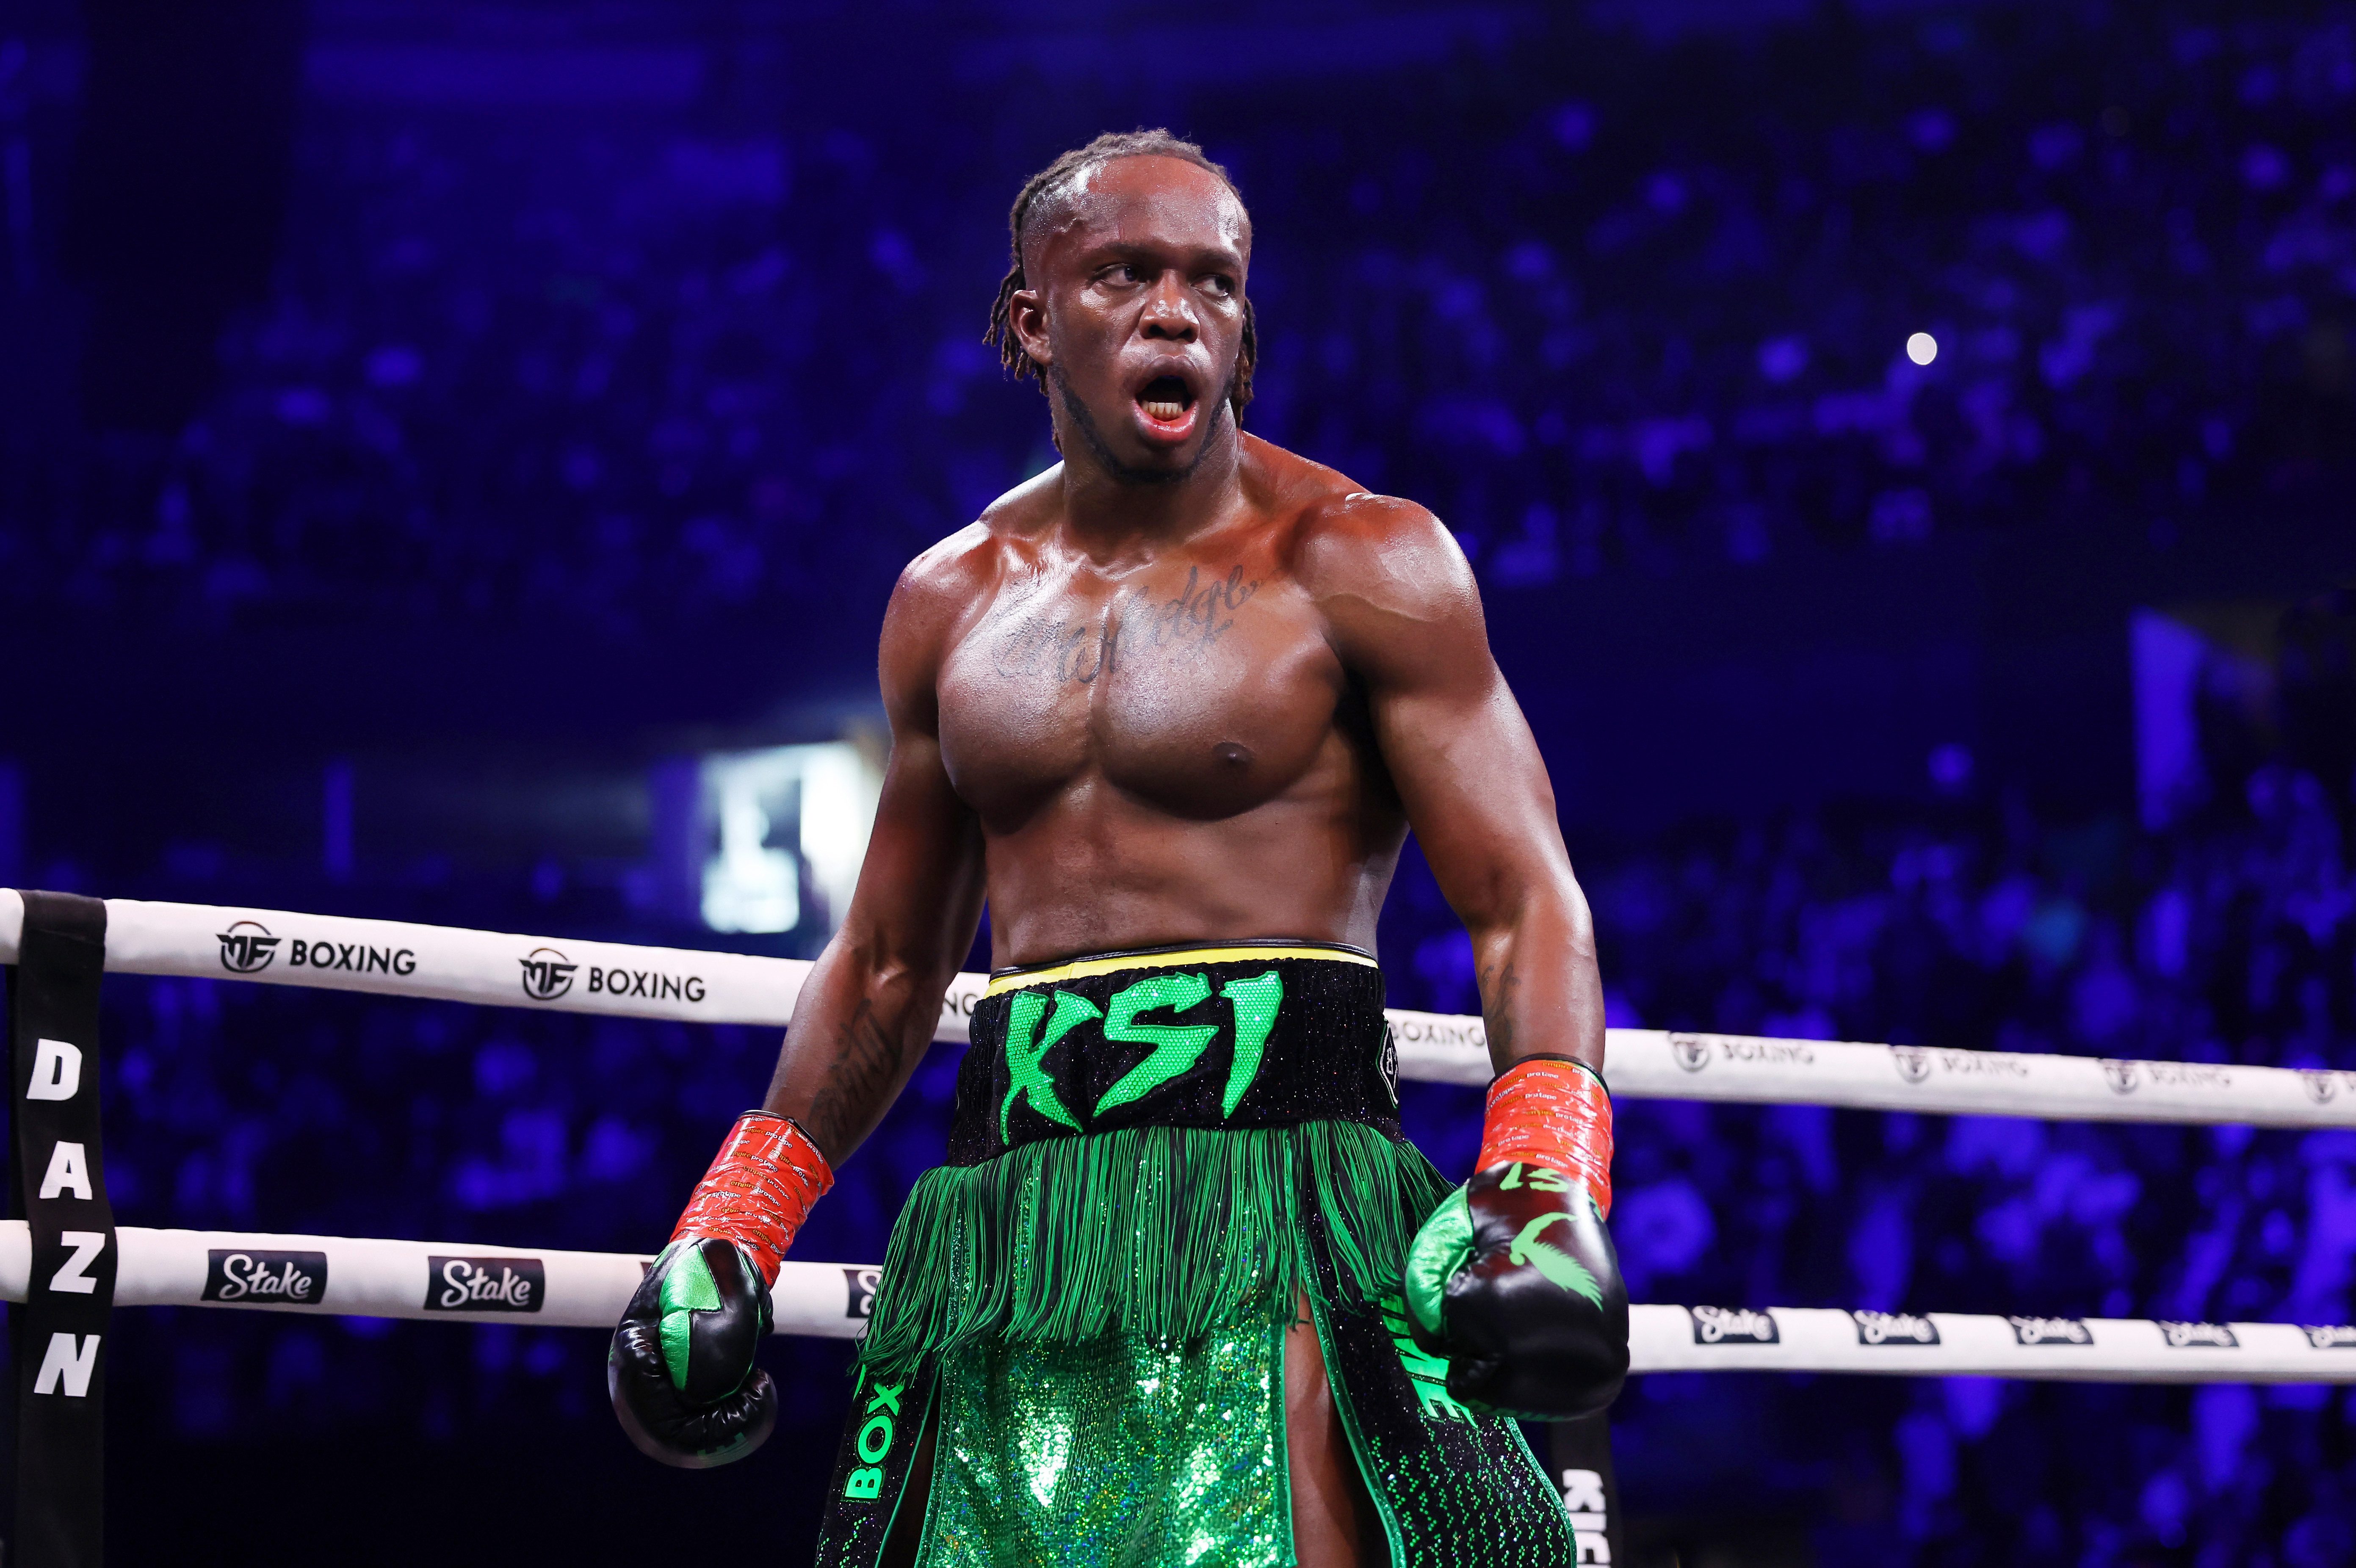 KSI himself could be a possible opponent for Wayne Rooney